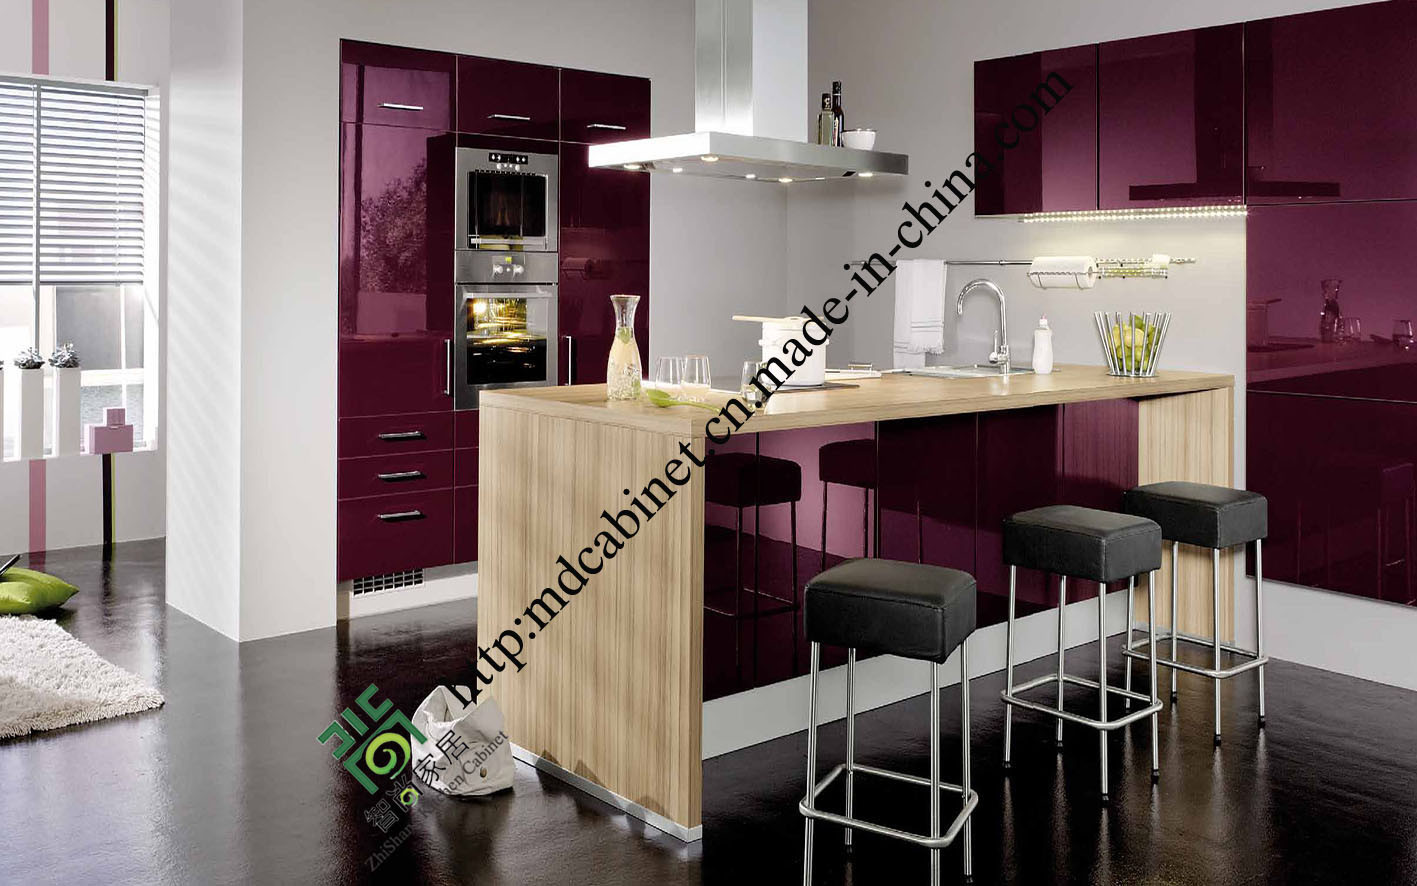 New Design Comtemporary Kitchen Cabinet From China